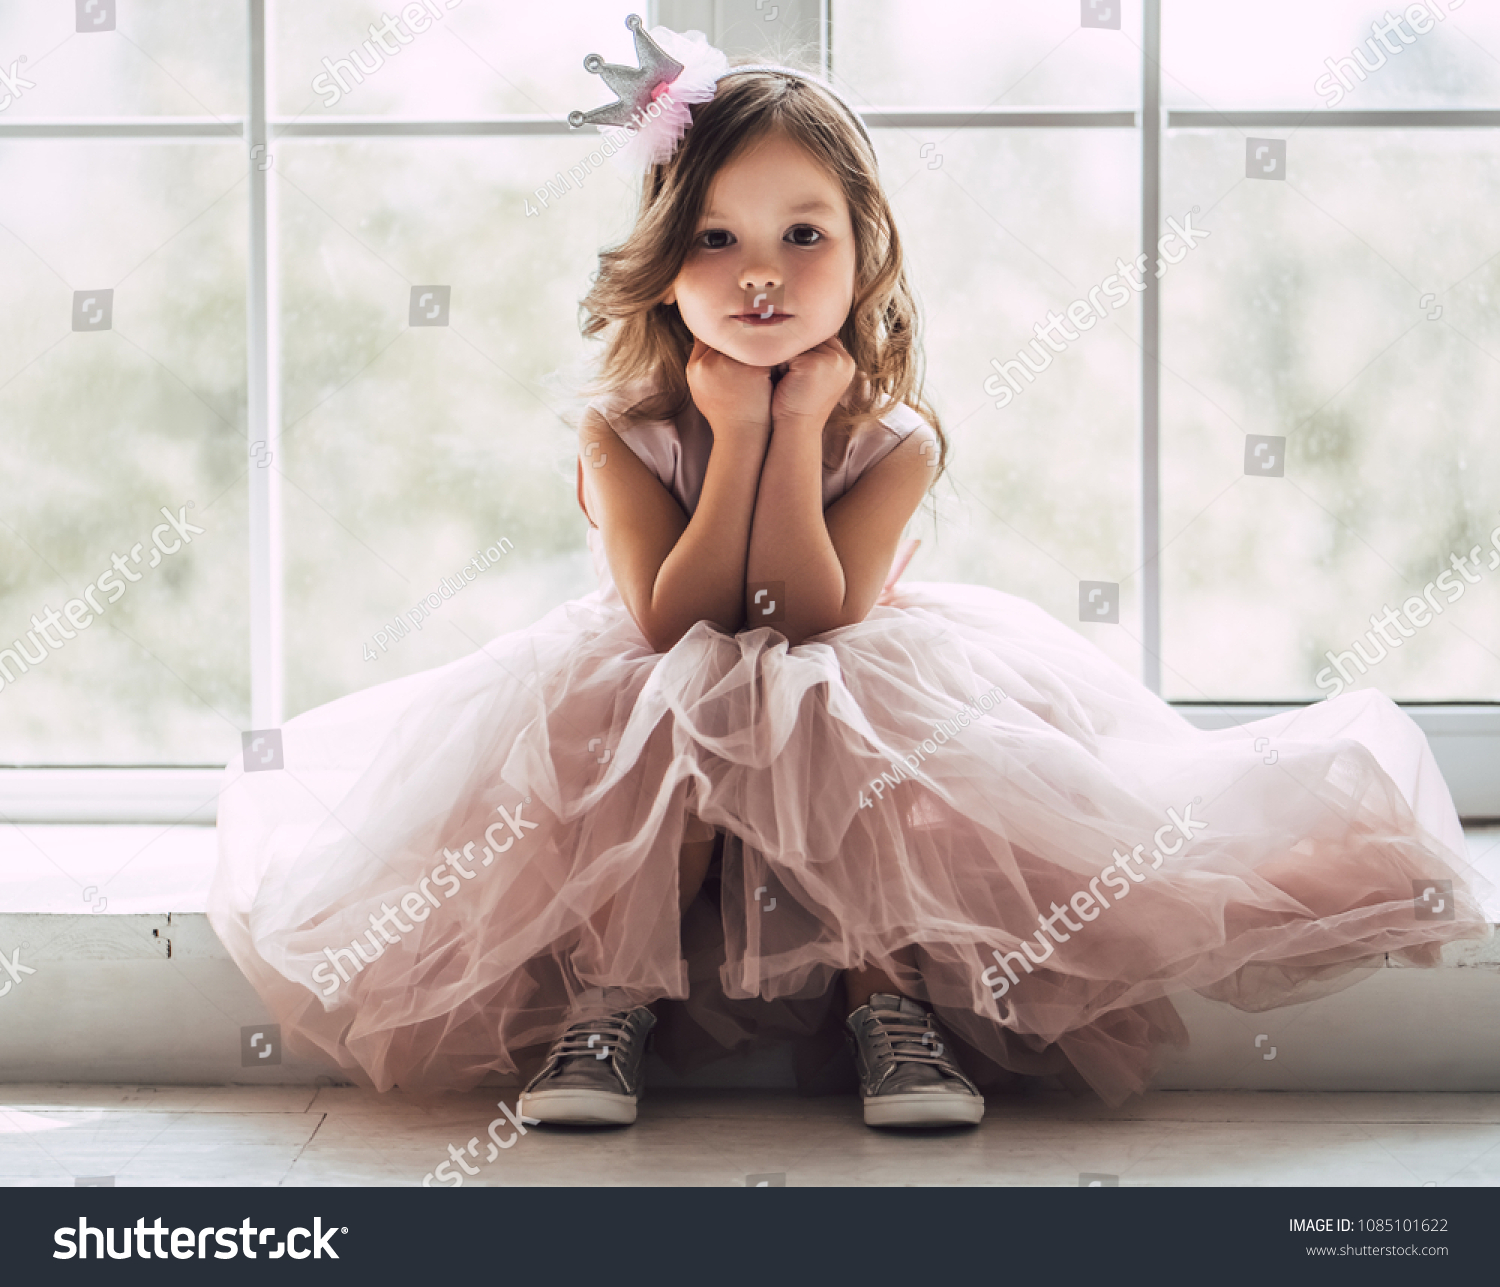 Little cute girl in beautiful dress is sitting near the window at home. #1085101622